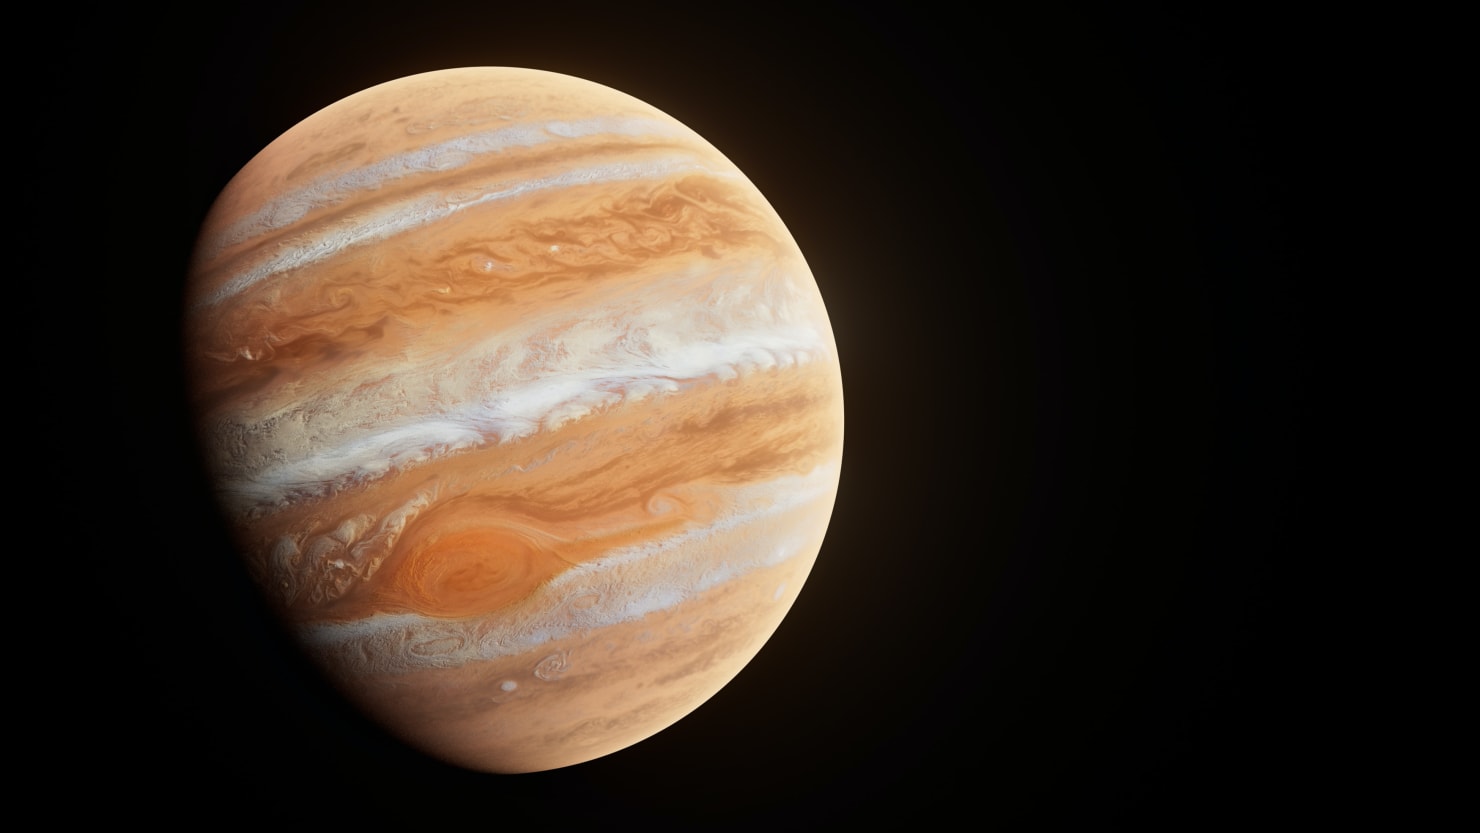 This mission will search the icy moons of Jupiter for alien life